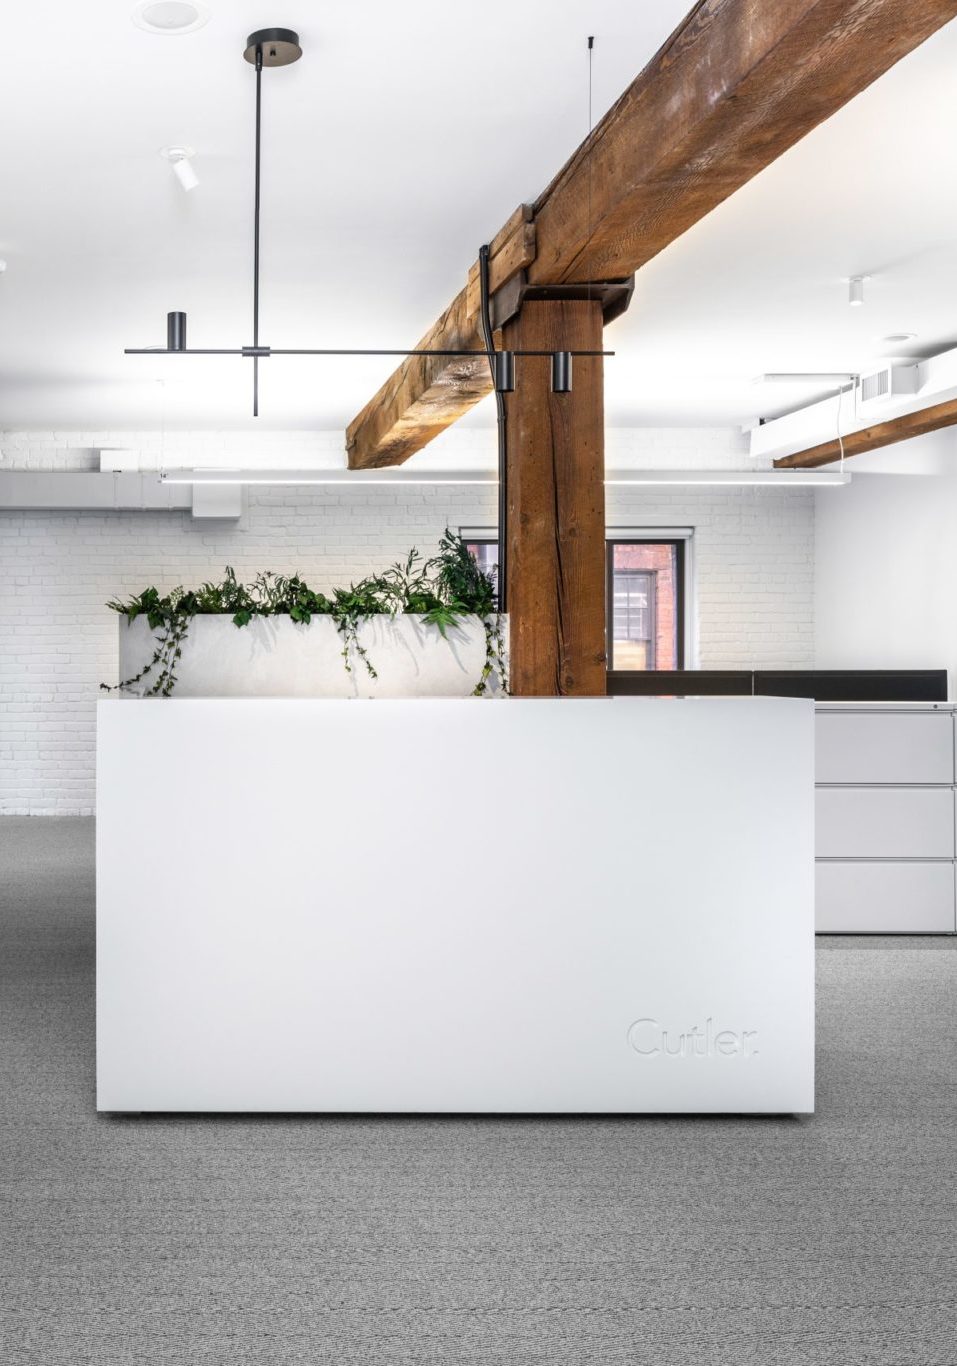 Cutler Architecture & Interior Design office reception desk client waiting area with light fixture over hanging and white desks and walls